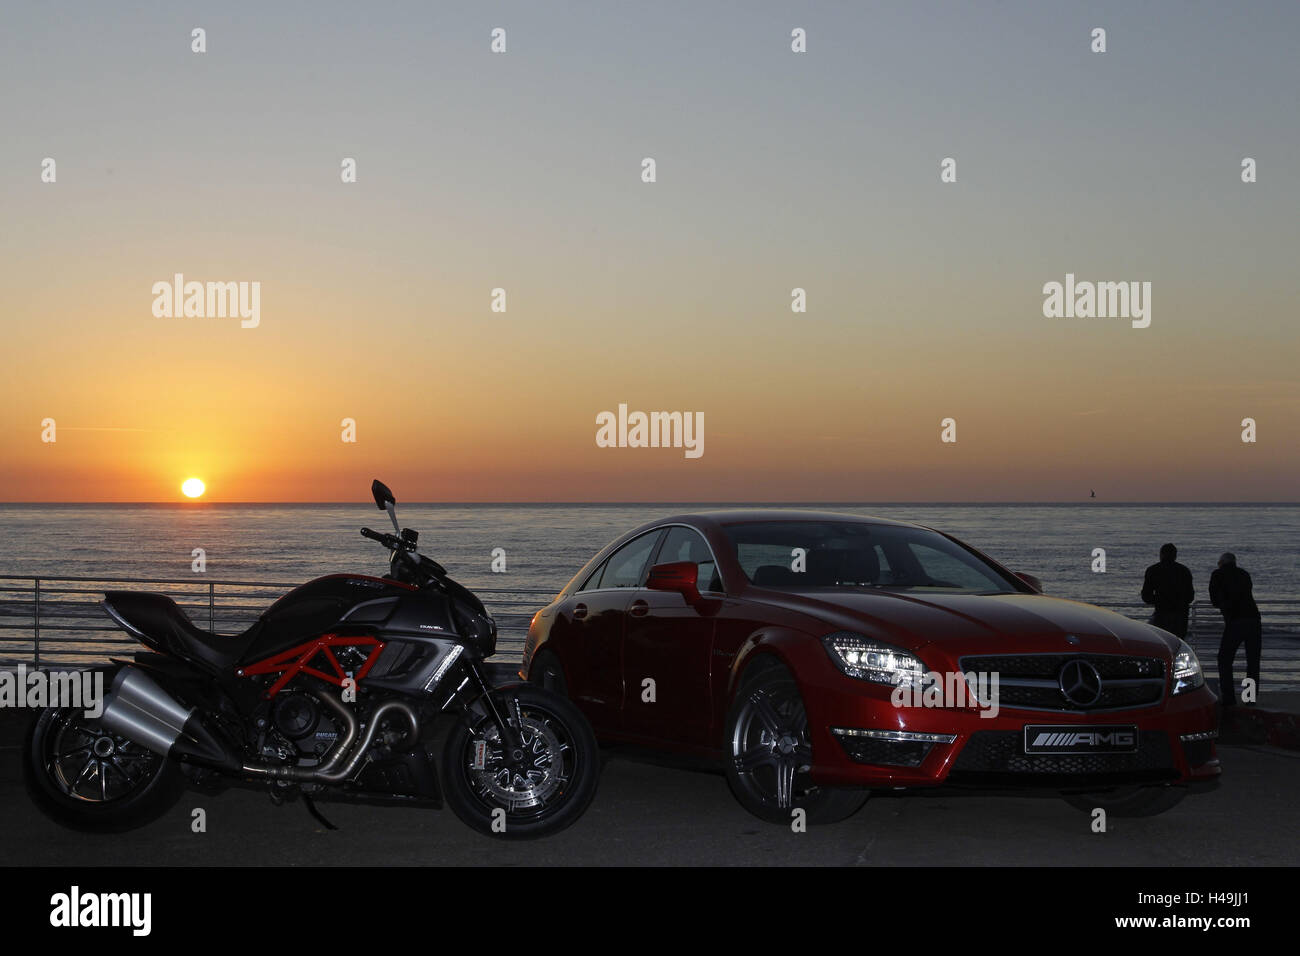 Motorcycle, Ducati Diavel and Mercedes CLS 63 AMG red, Musclebike, sundown, beach, people in the background, Stock Photo